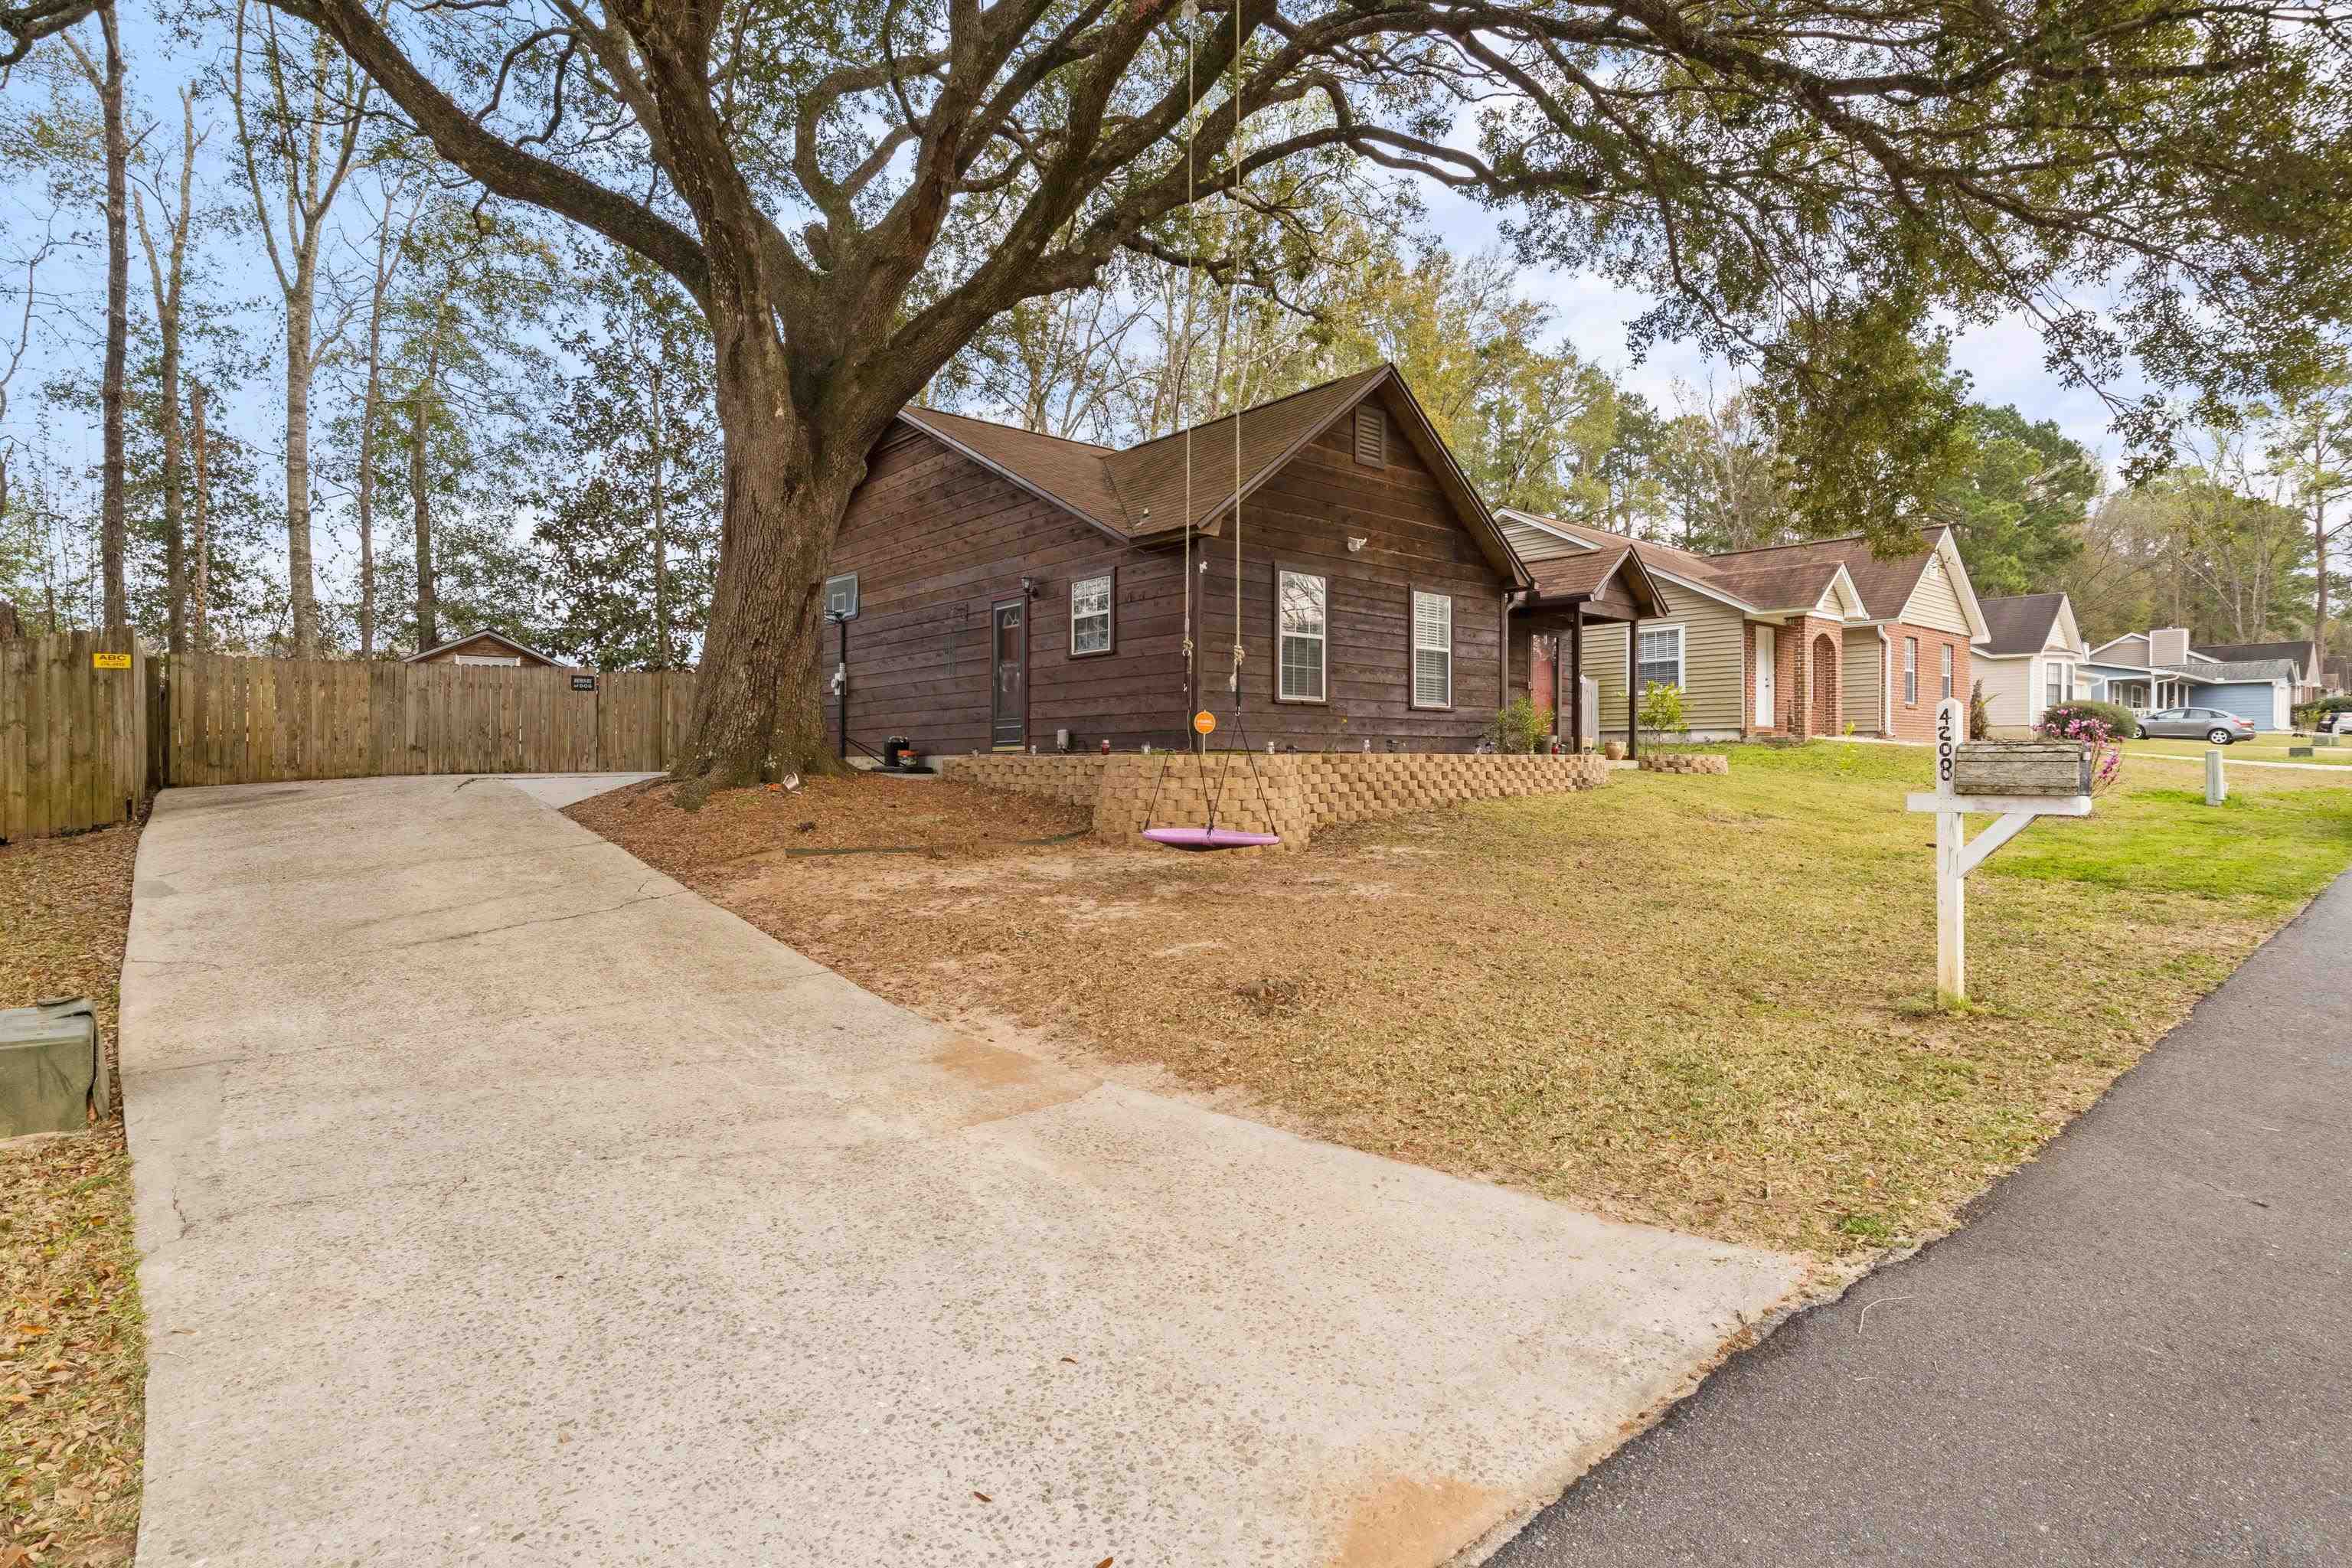 4208 Red Oak Drive,TALLAHASSEE,Florida 32311,3 Bedrooms Bedrooms,2 BathroomsBathrooms,Detached single family,4208 Red Oak Drive,369345